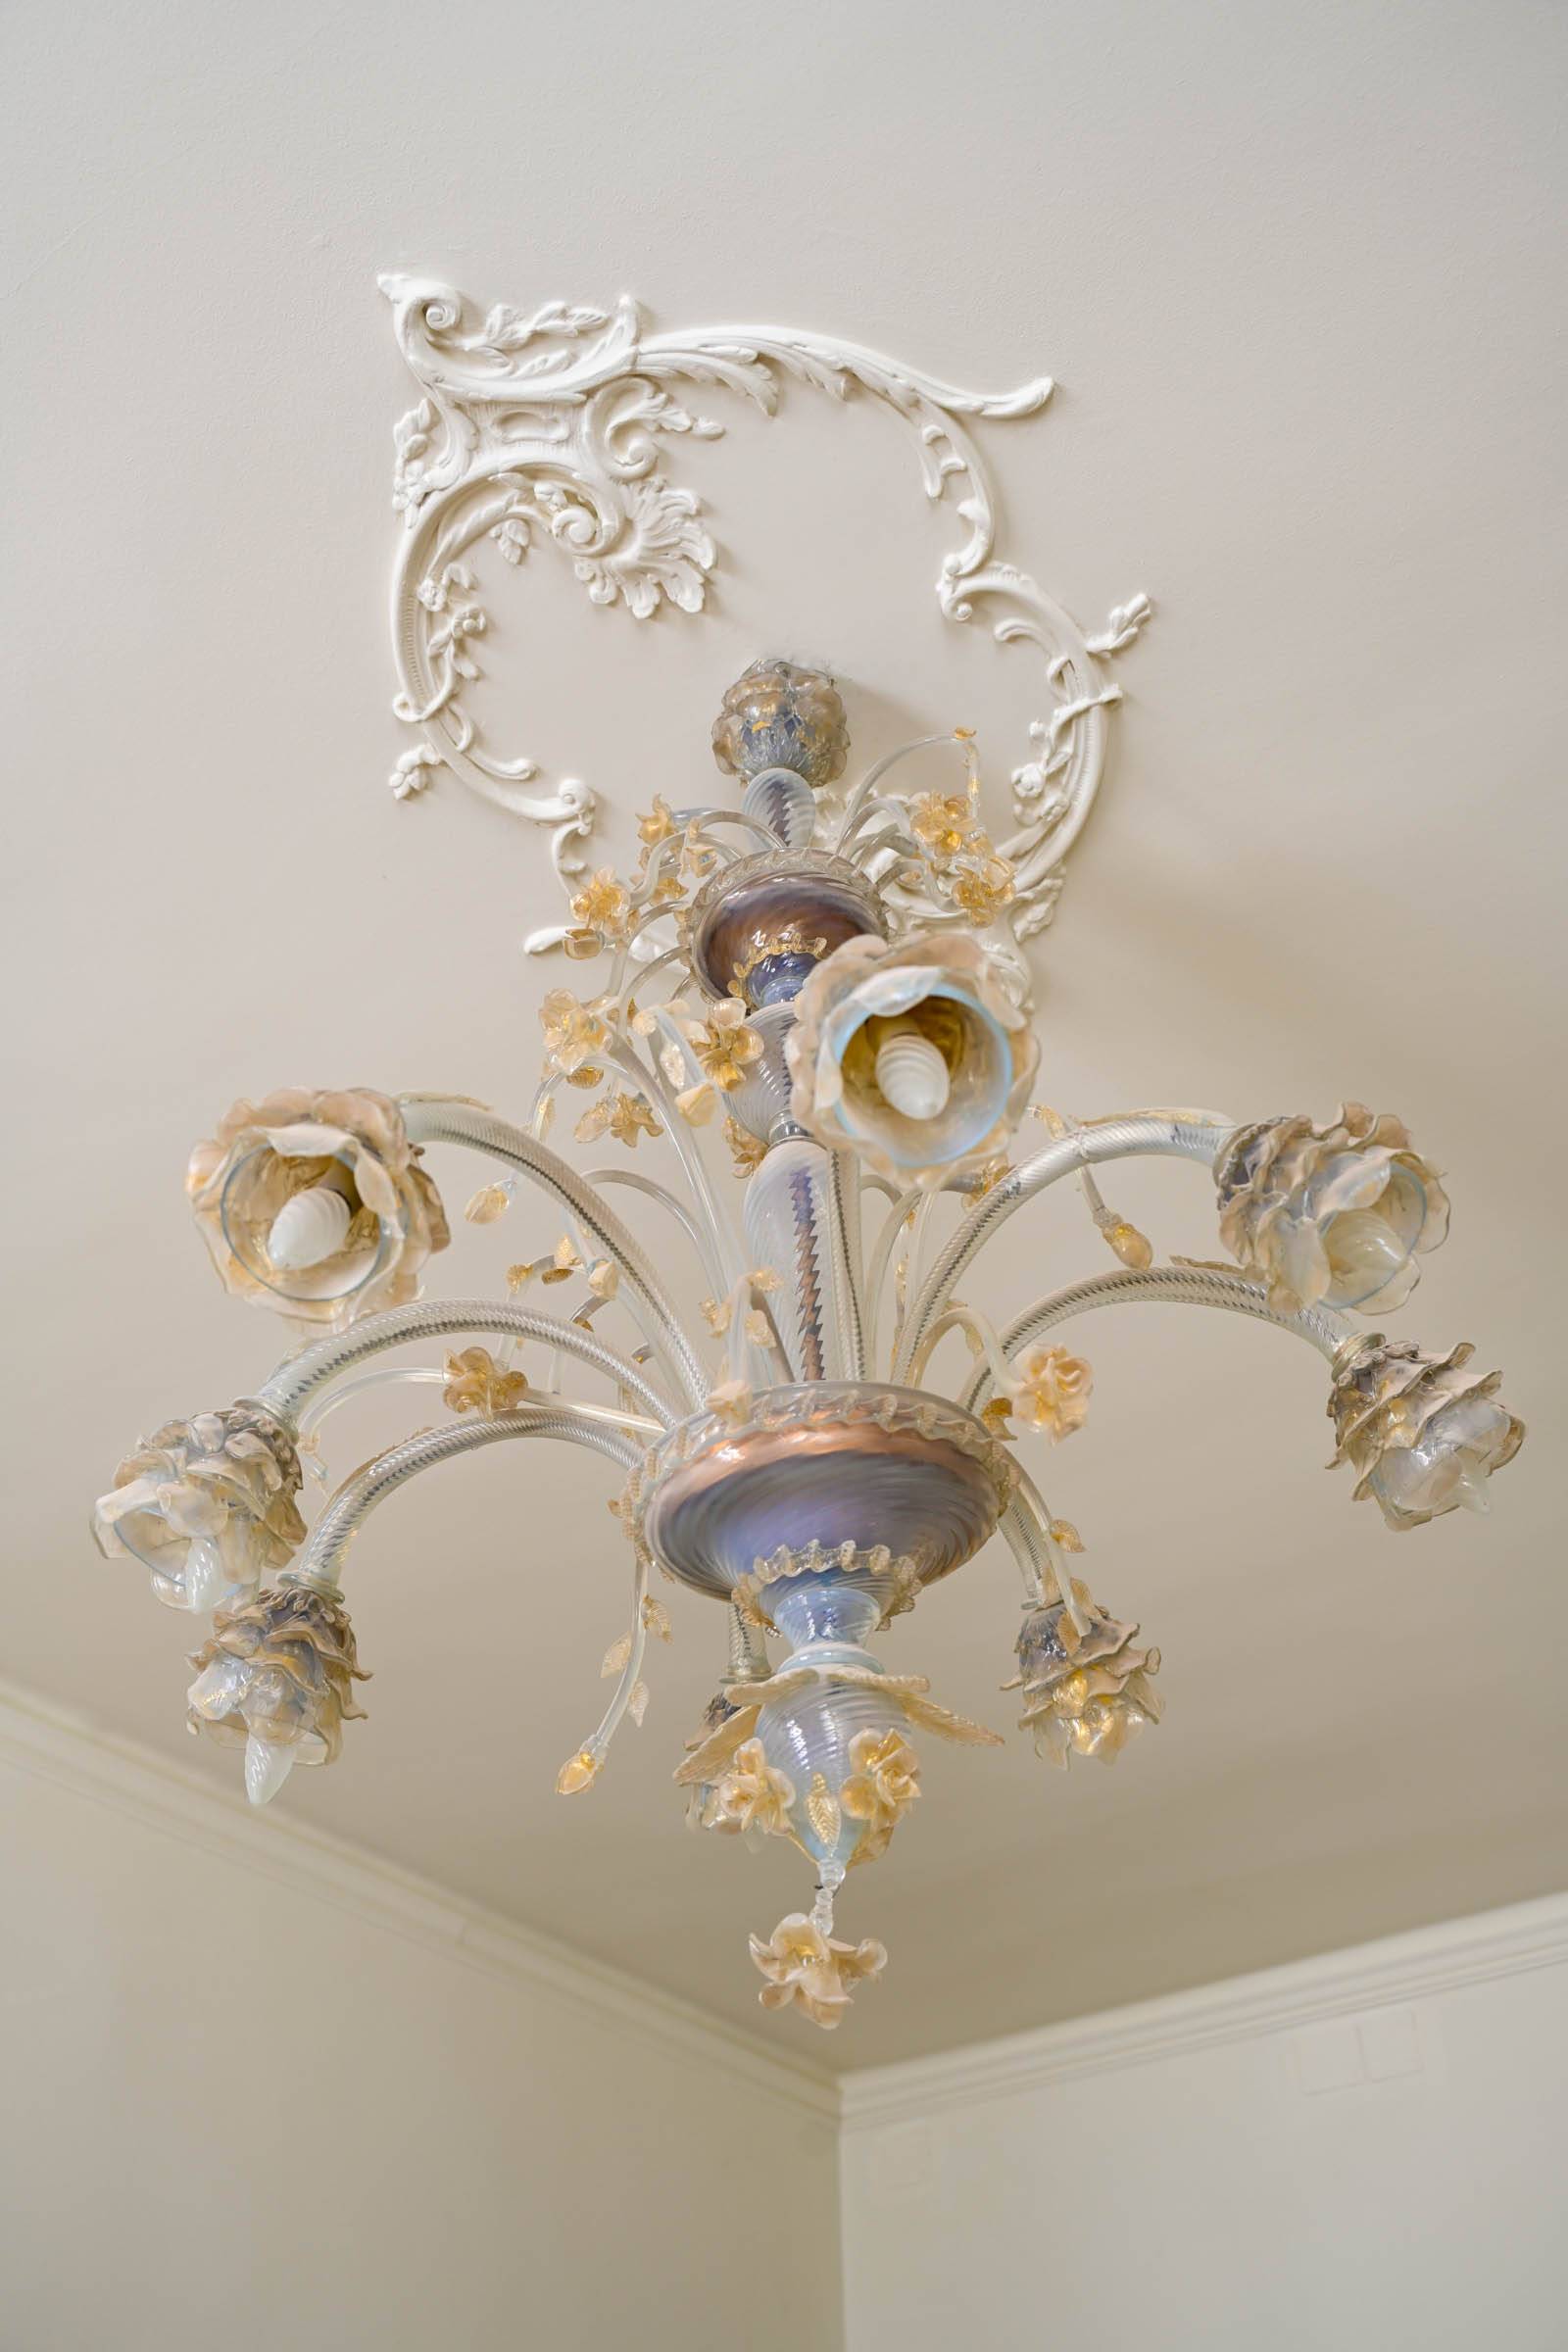 Murano Glass chandeliers in every room 